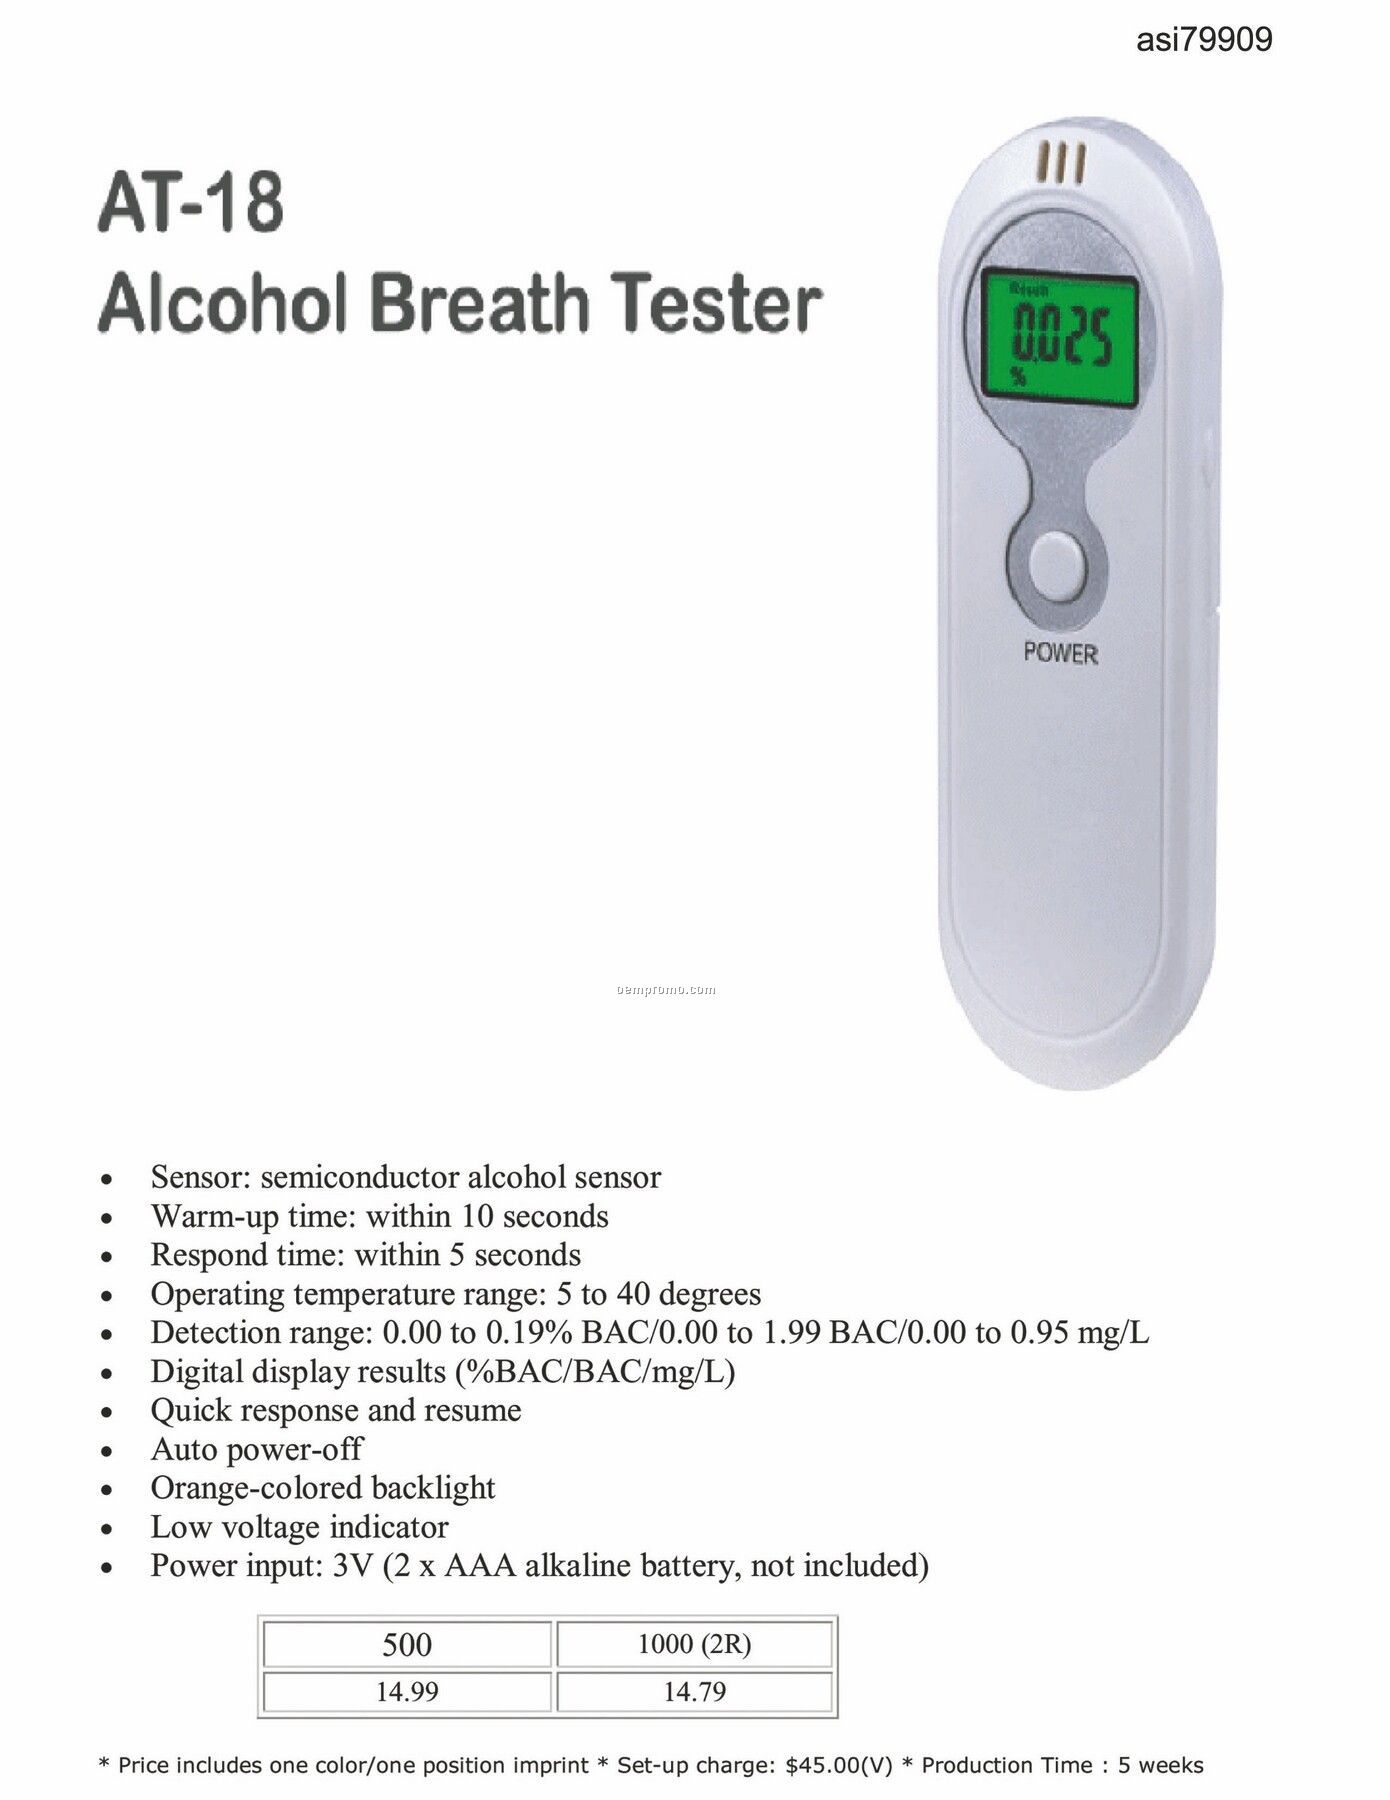 Oval Alcohol Breath Tester